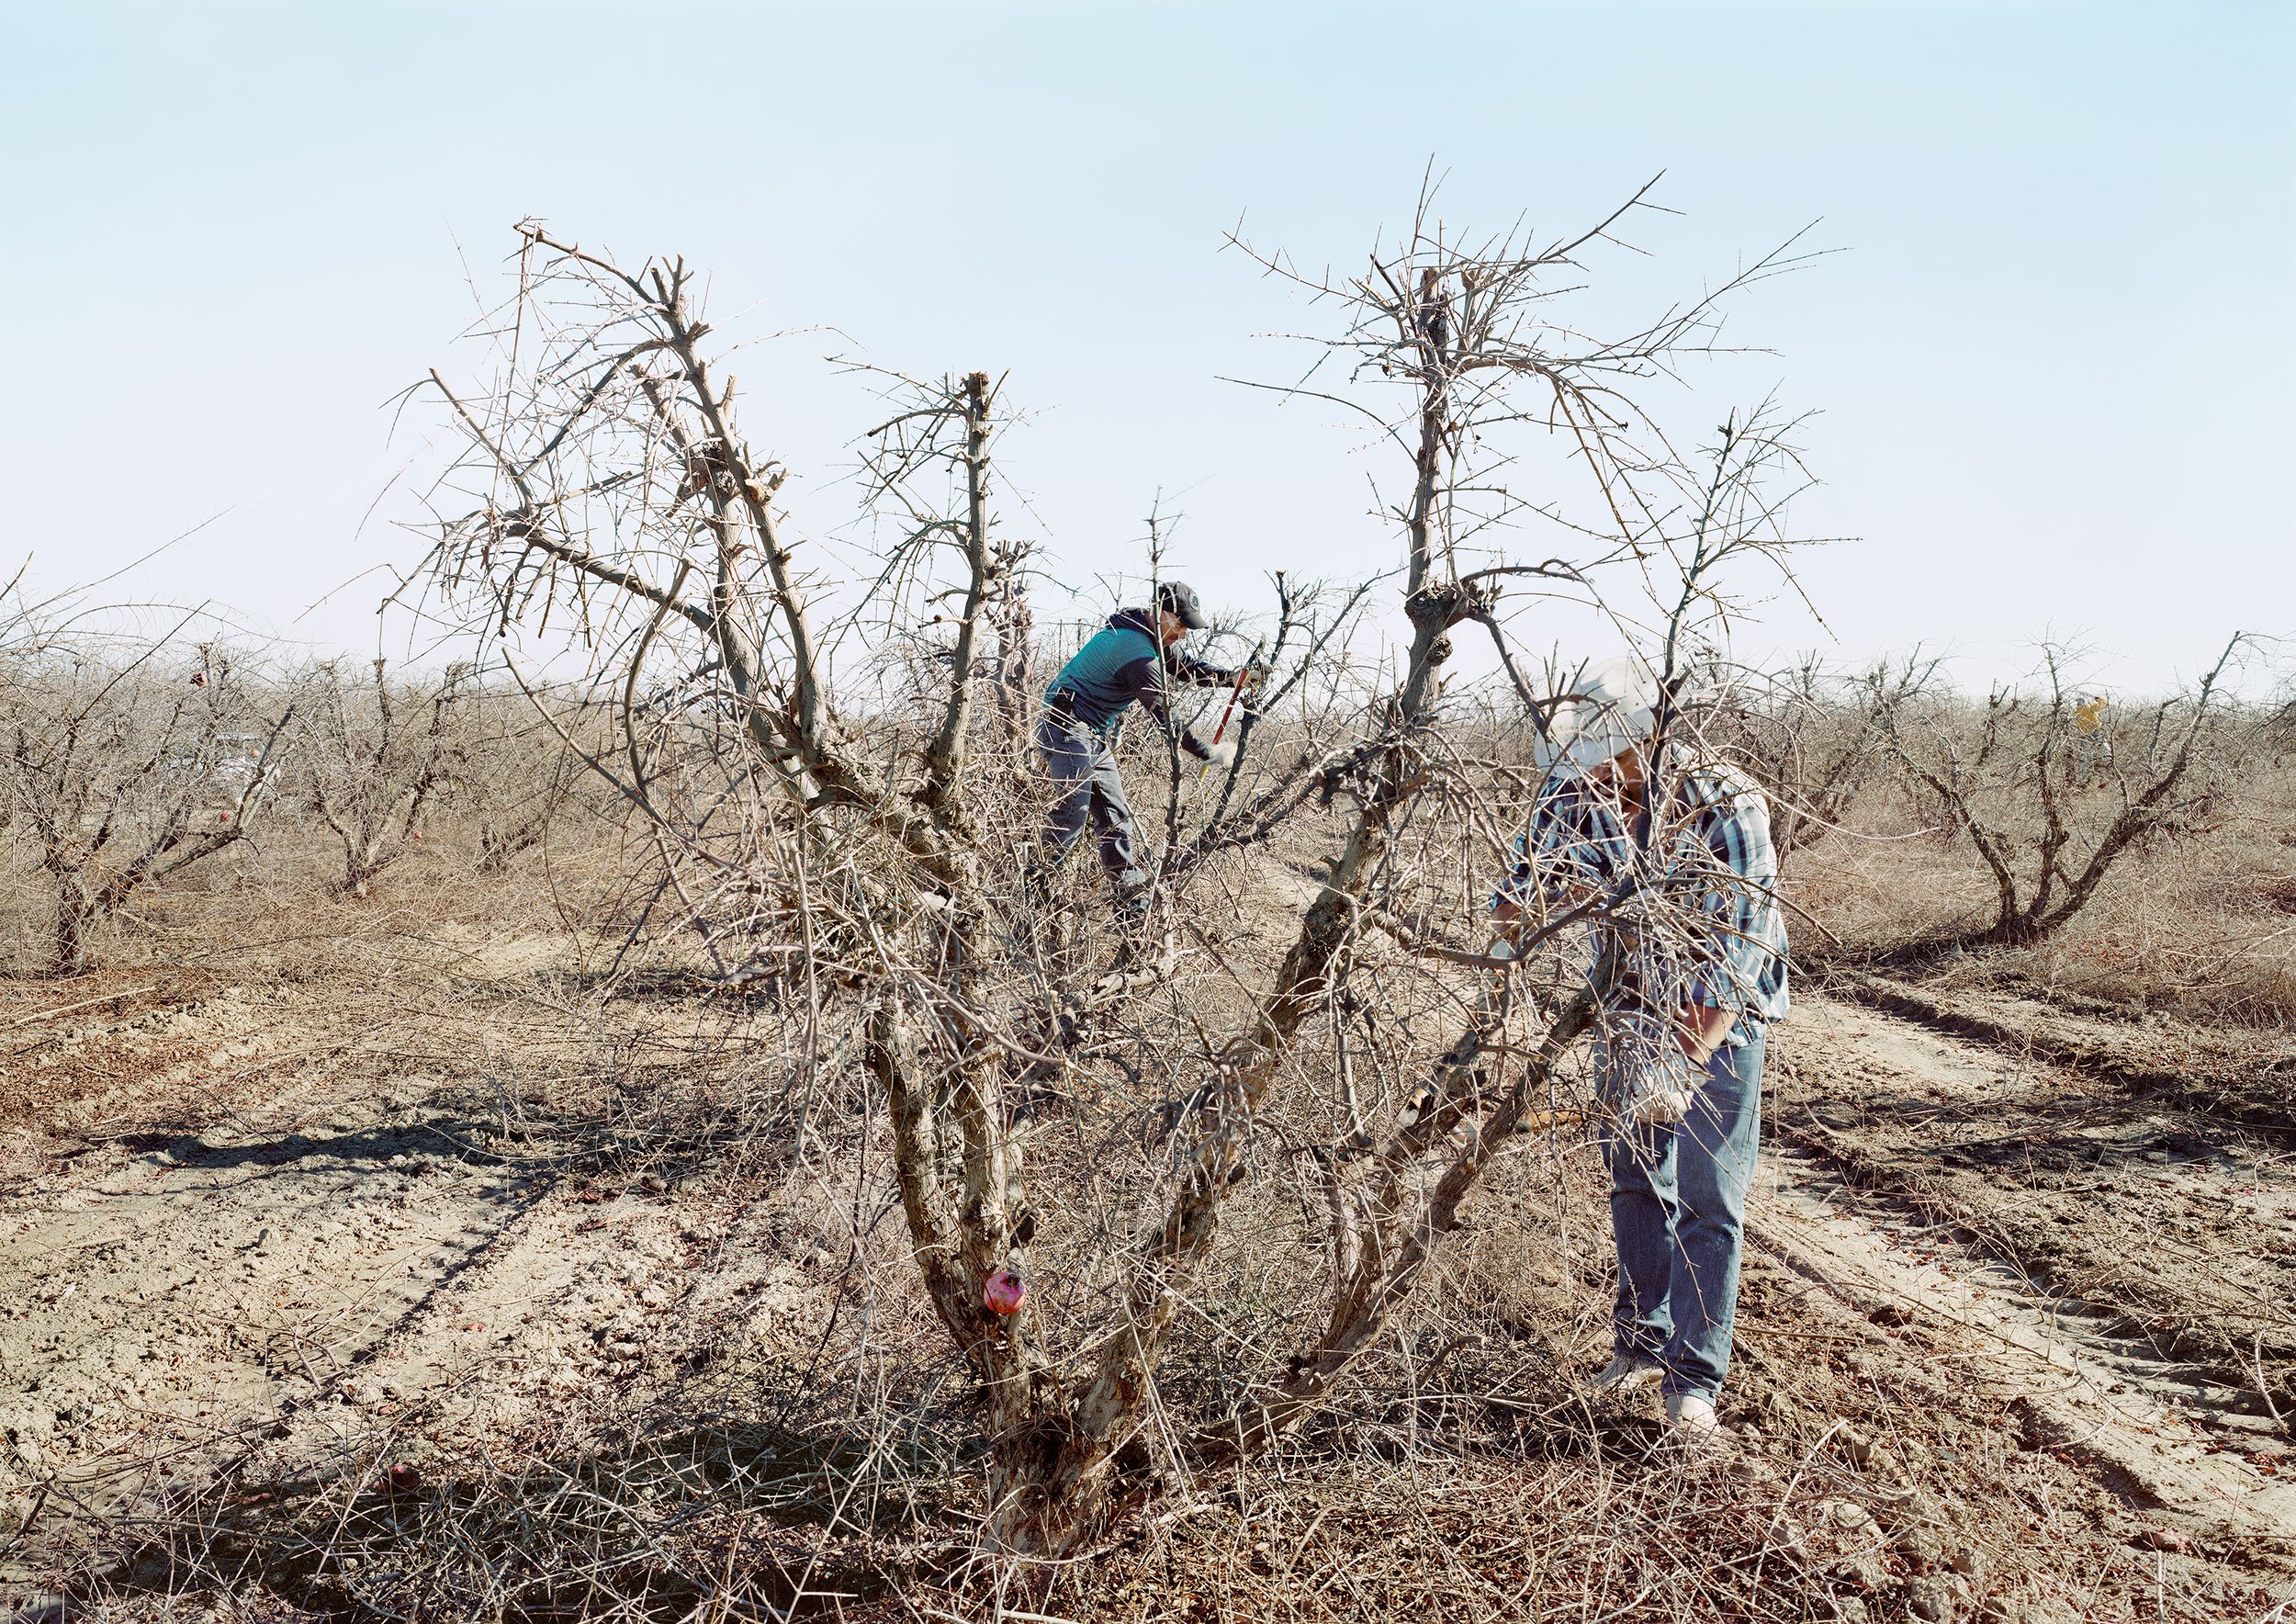 Migrant Workers Pruning Pomegranate Trees, Mendota, CA, 2018